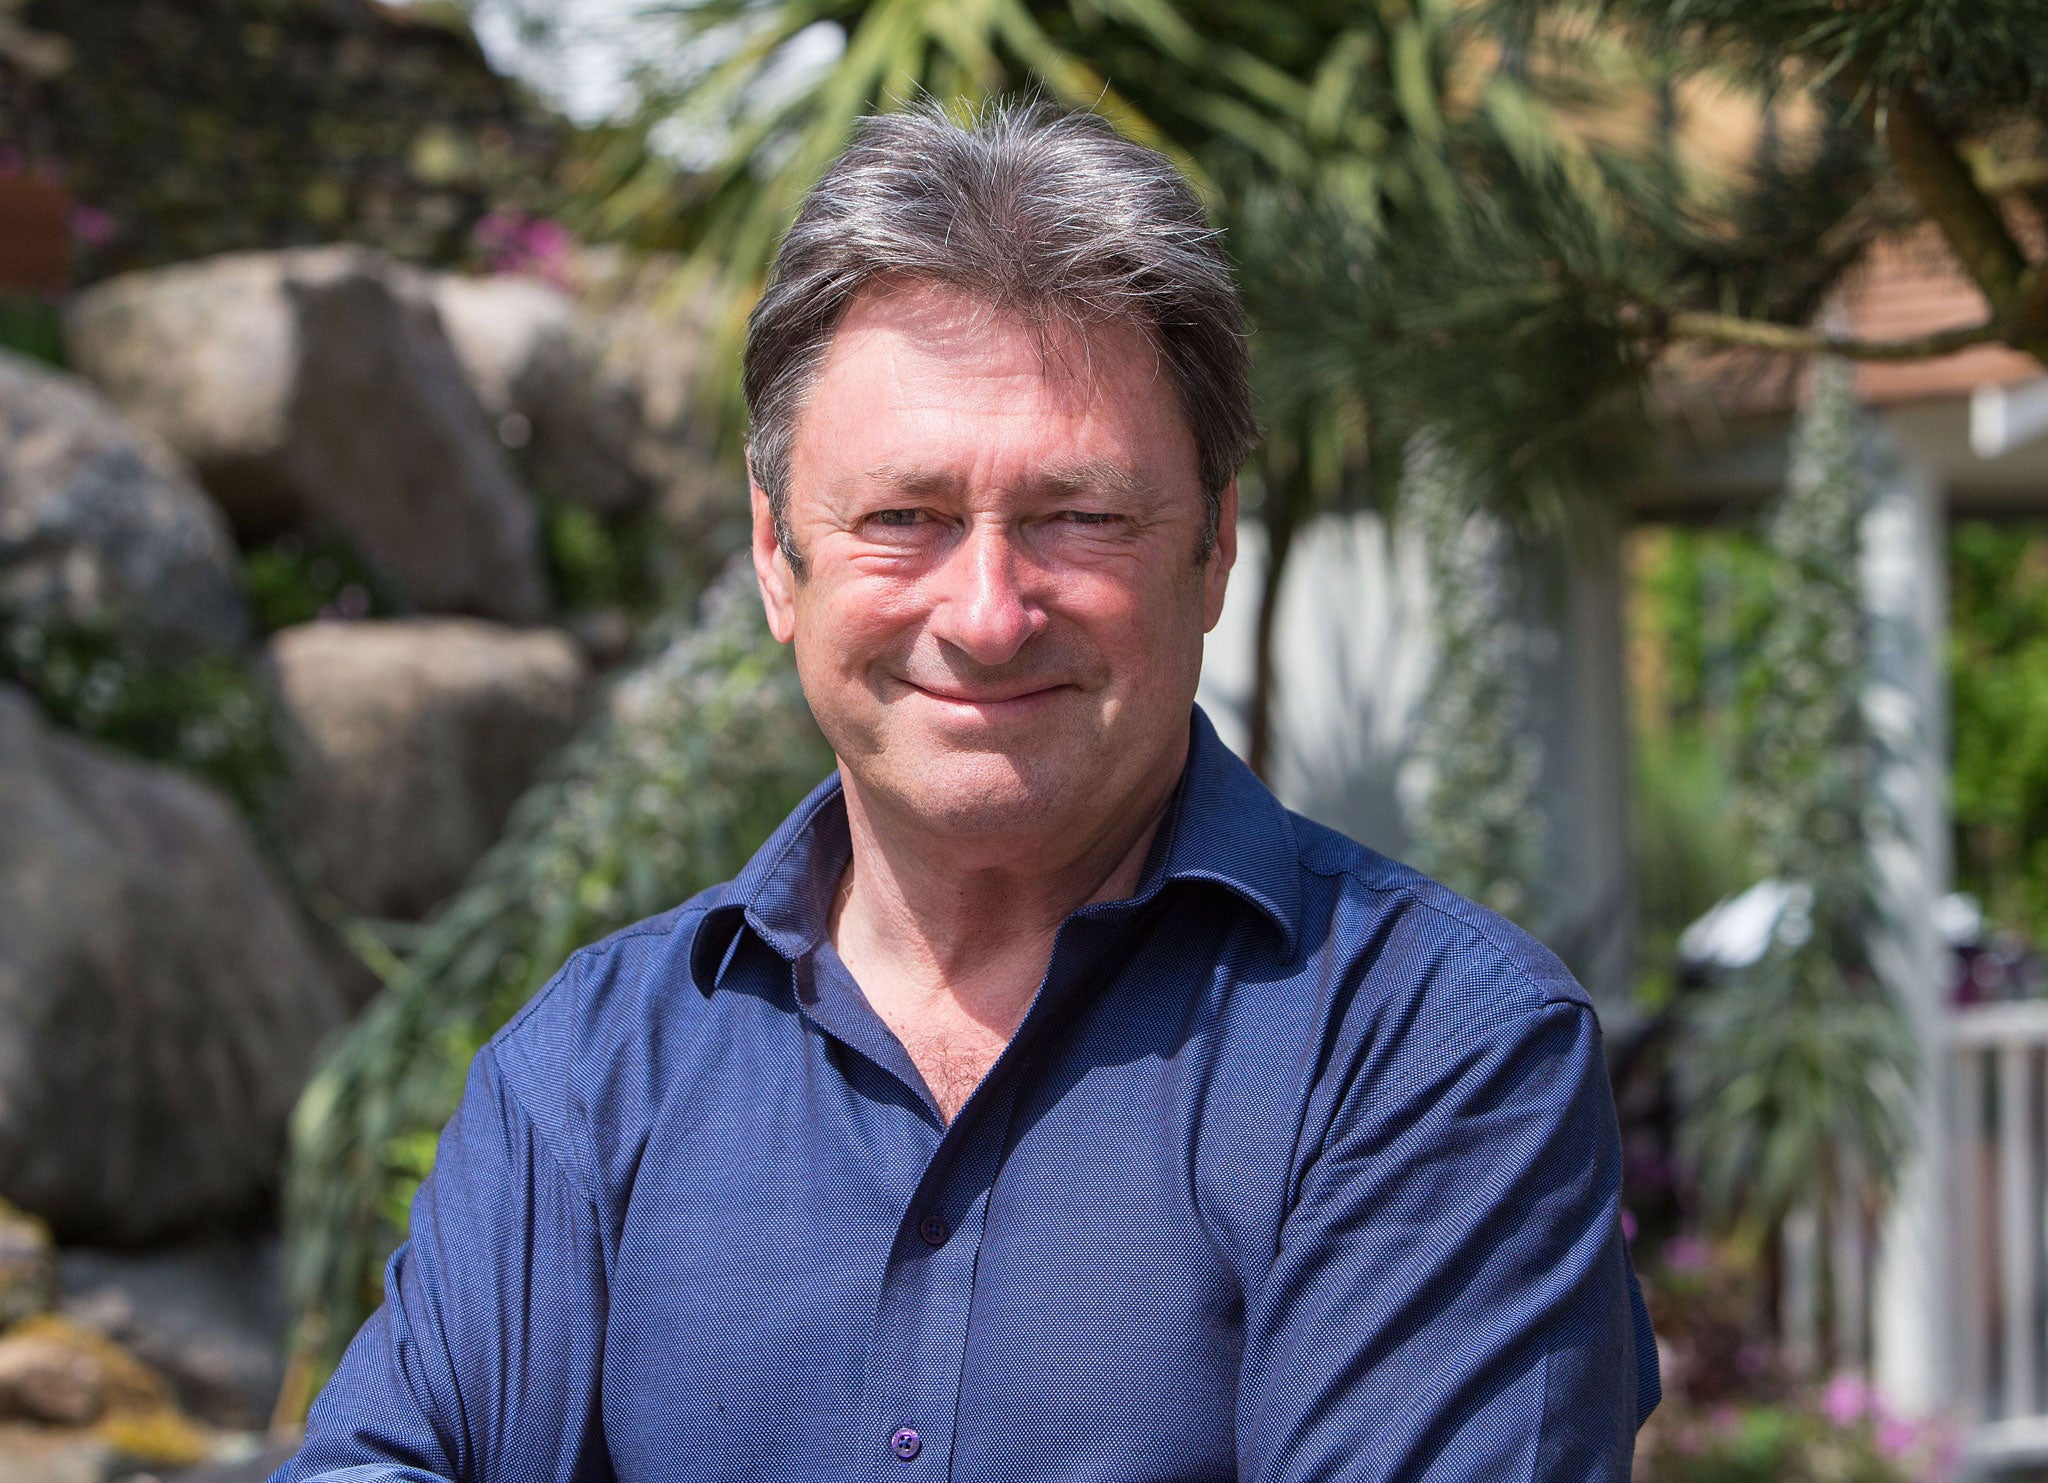 Titchmarsh swore on BBC Breakfast, but he was using a legitimate gardening term